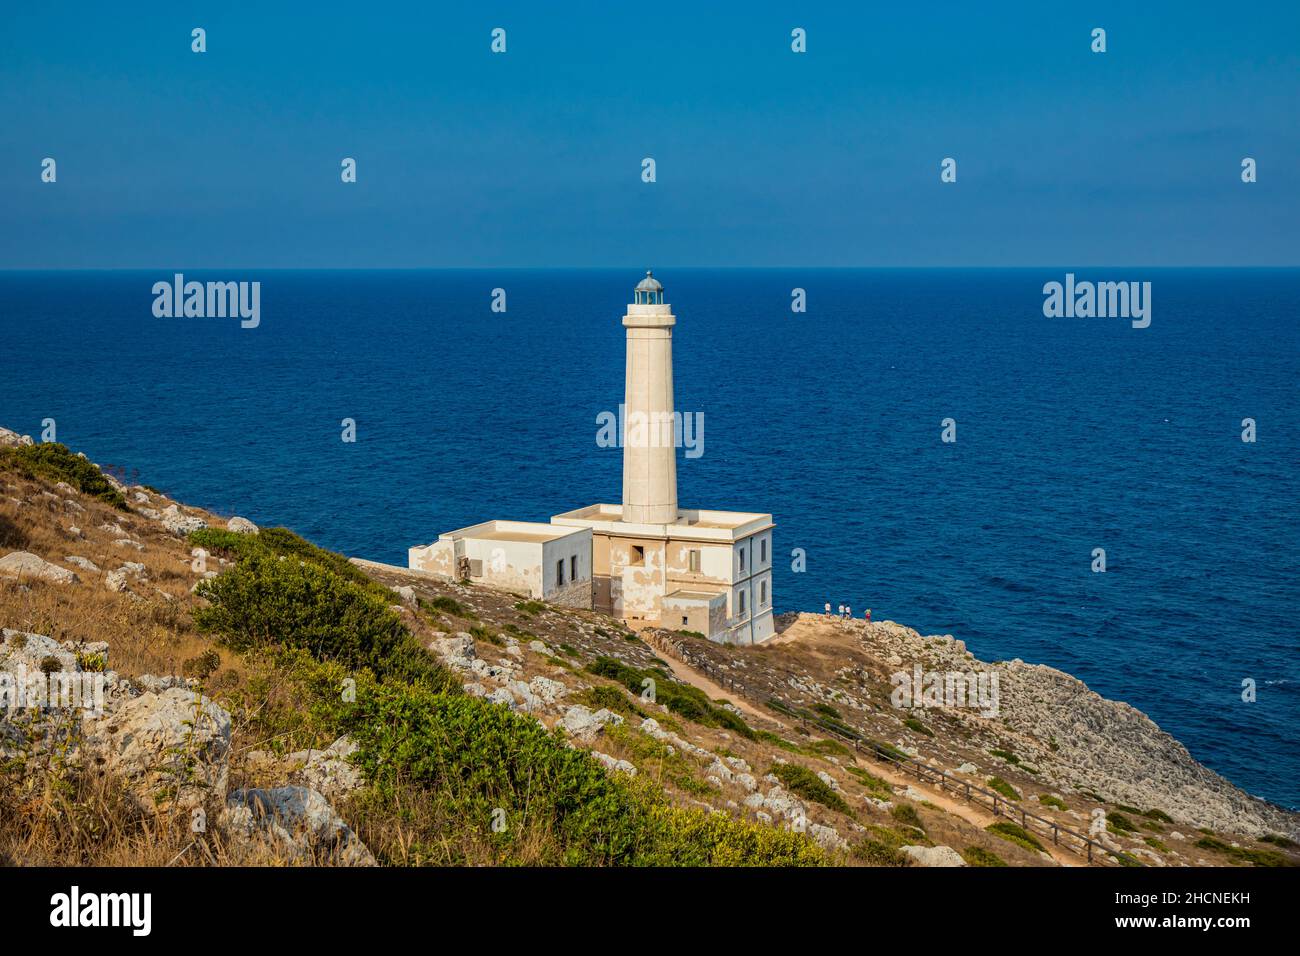 The lighthouse of Punta Palascia, in Otranto, Lecce, Salento, Puglia, Italy. The cape is Italy's most easterly point. The building is on the promontor Stock Photo